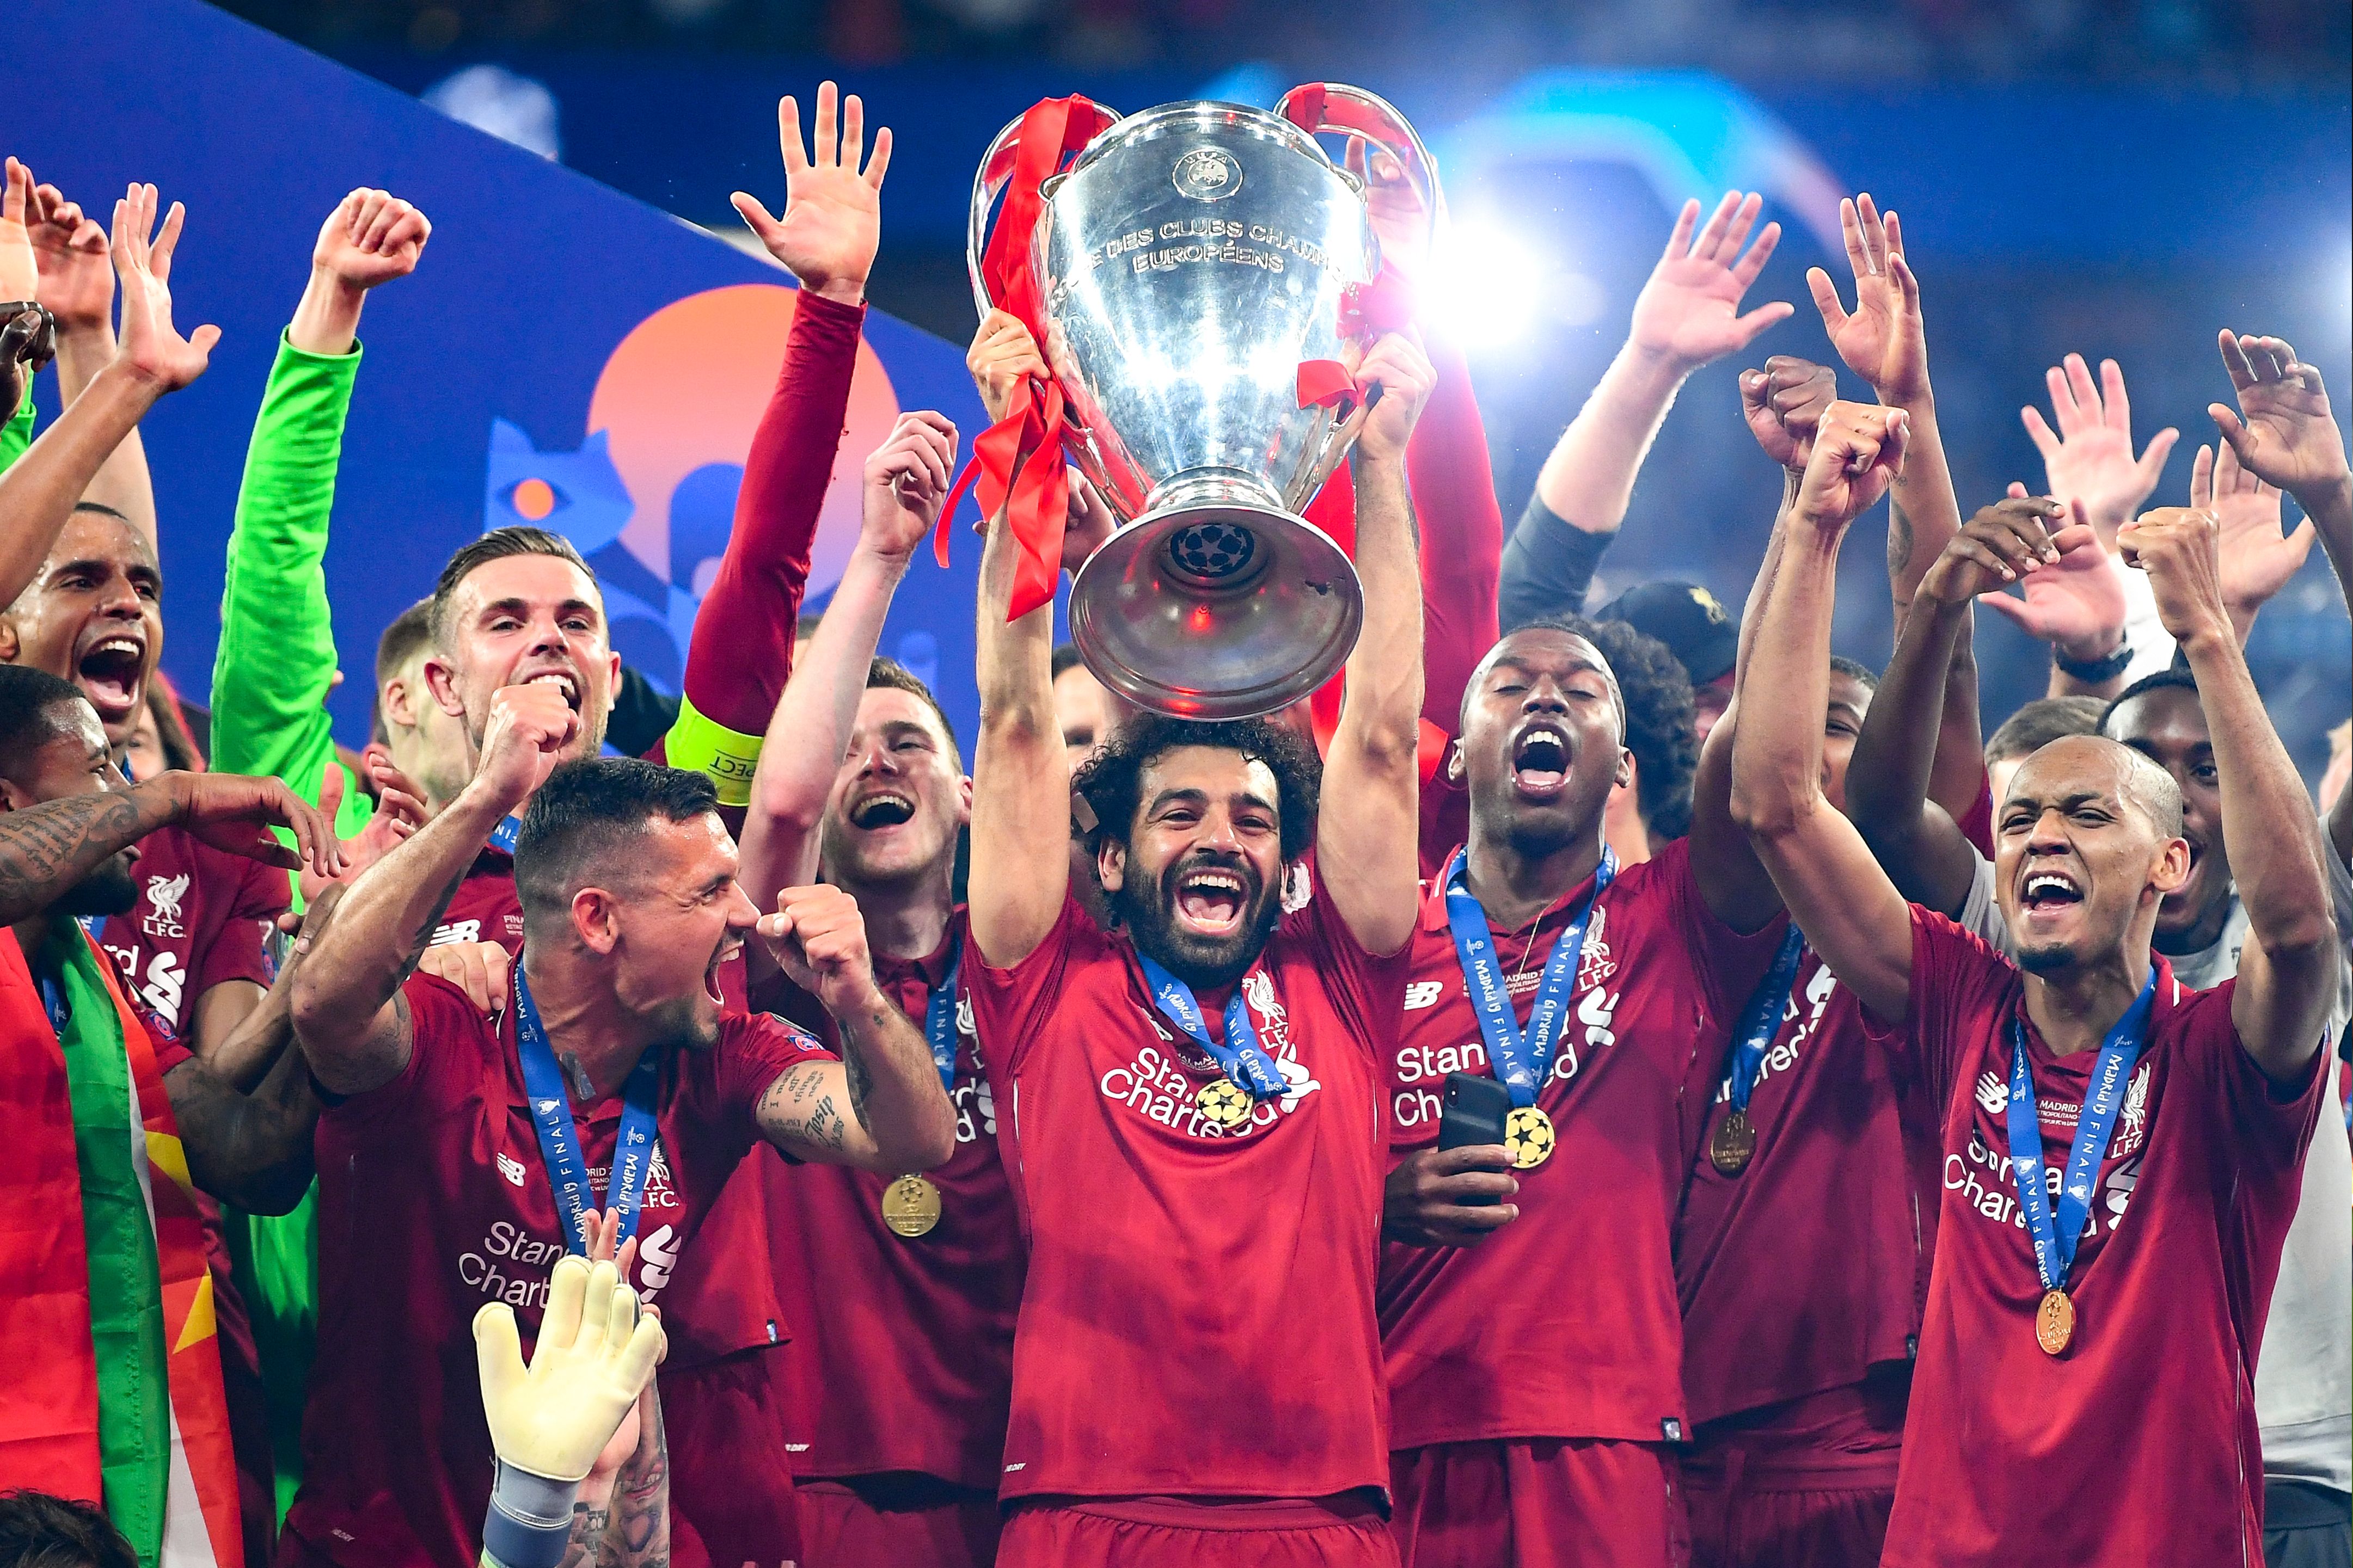 Mohamed Salah of Liverpool celebrates with the Champions League Trophy after winning the UEFA Champions League Final between Tottenham Hotspur and Liverpool at Estadio Wanda Metropolitano on June 01, 2019 in Madrid, Spain.